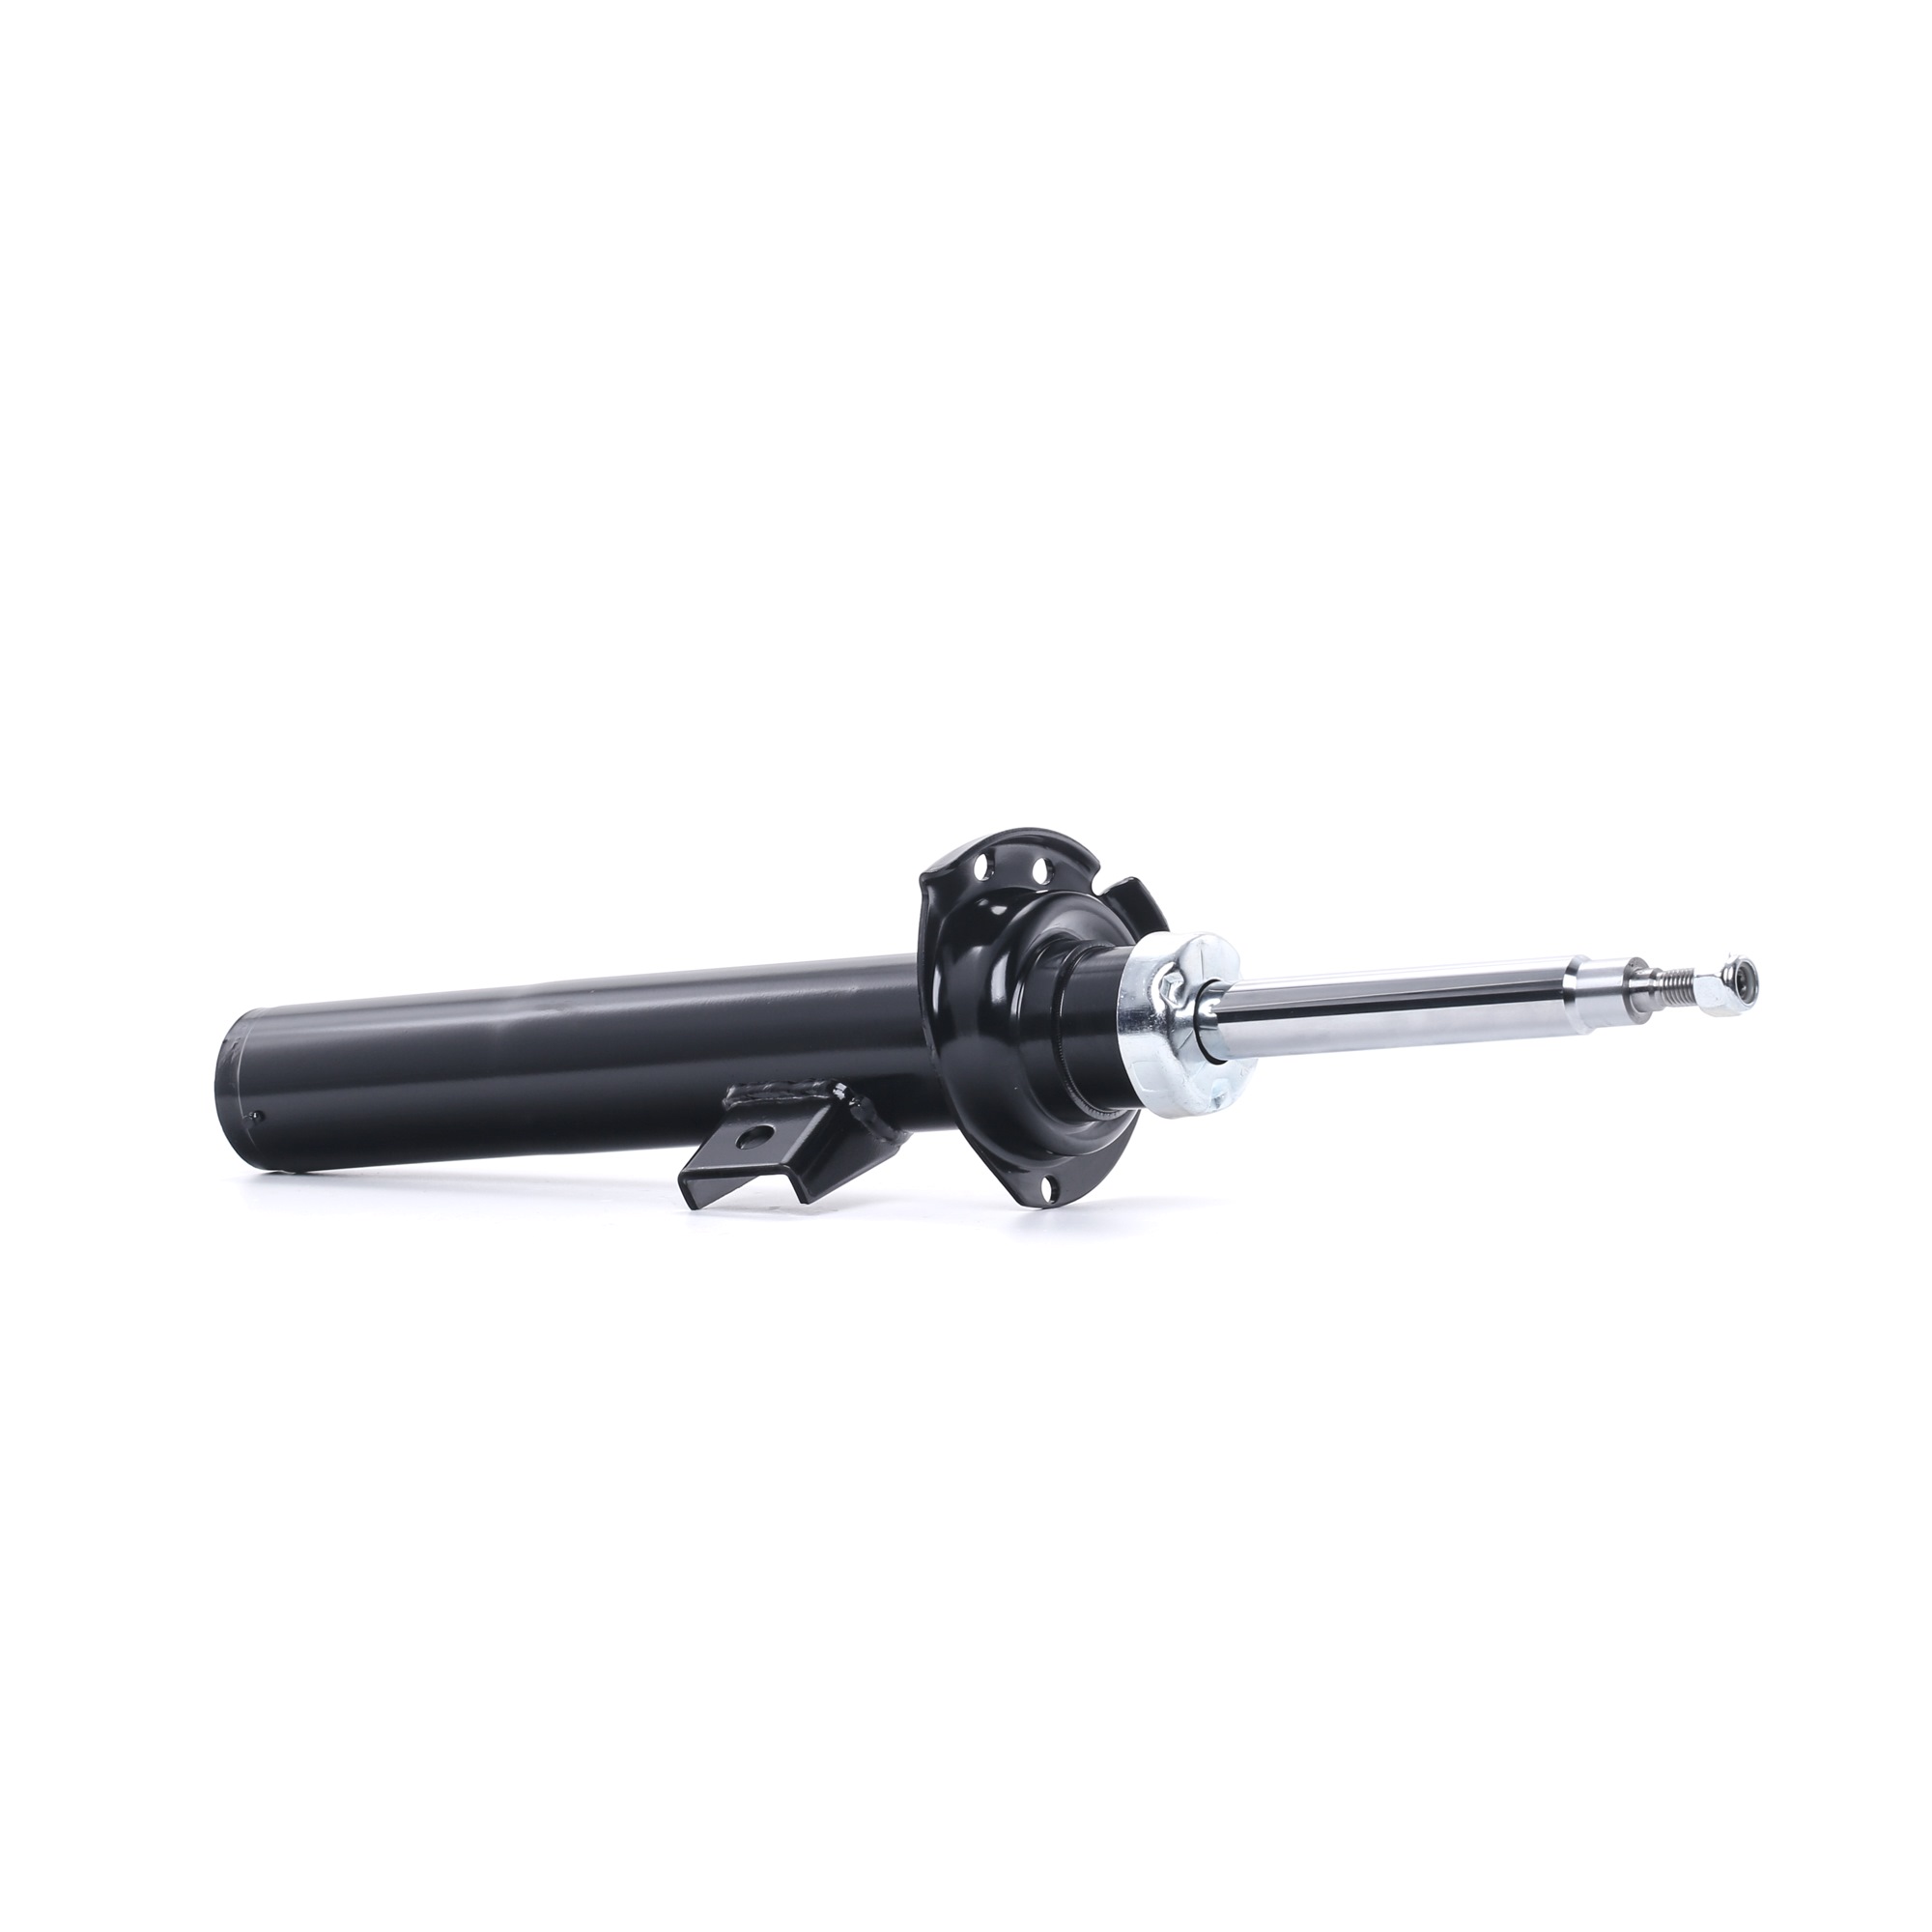 RIDEX 854S2383 Shock absorber Front Axle Right, Gas Pressure, 592x401 mm, Twin-Tube, Suspension Strut